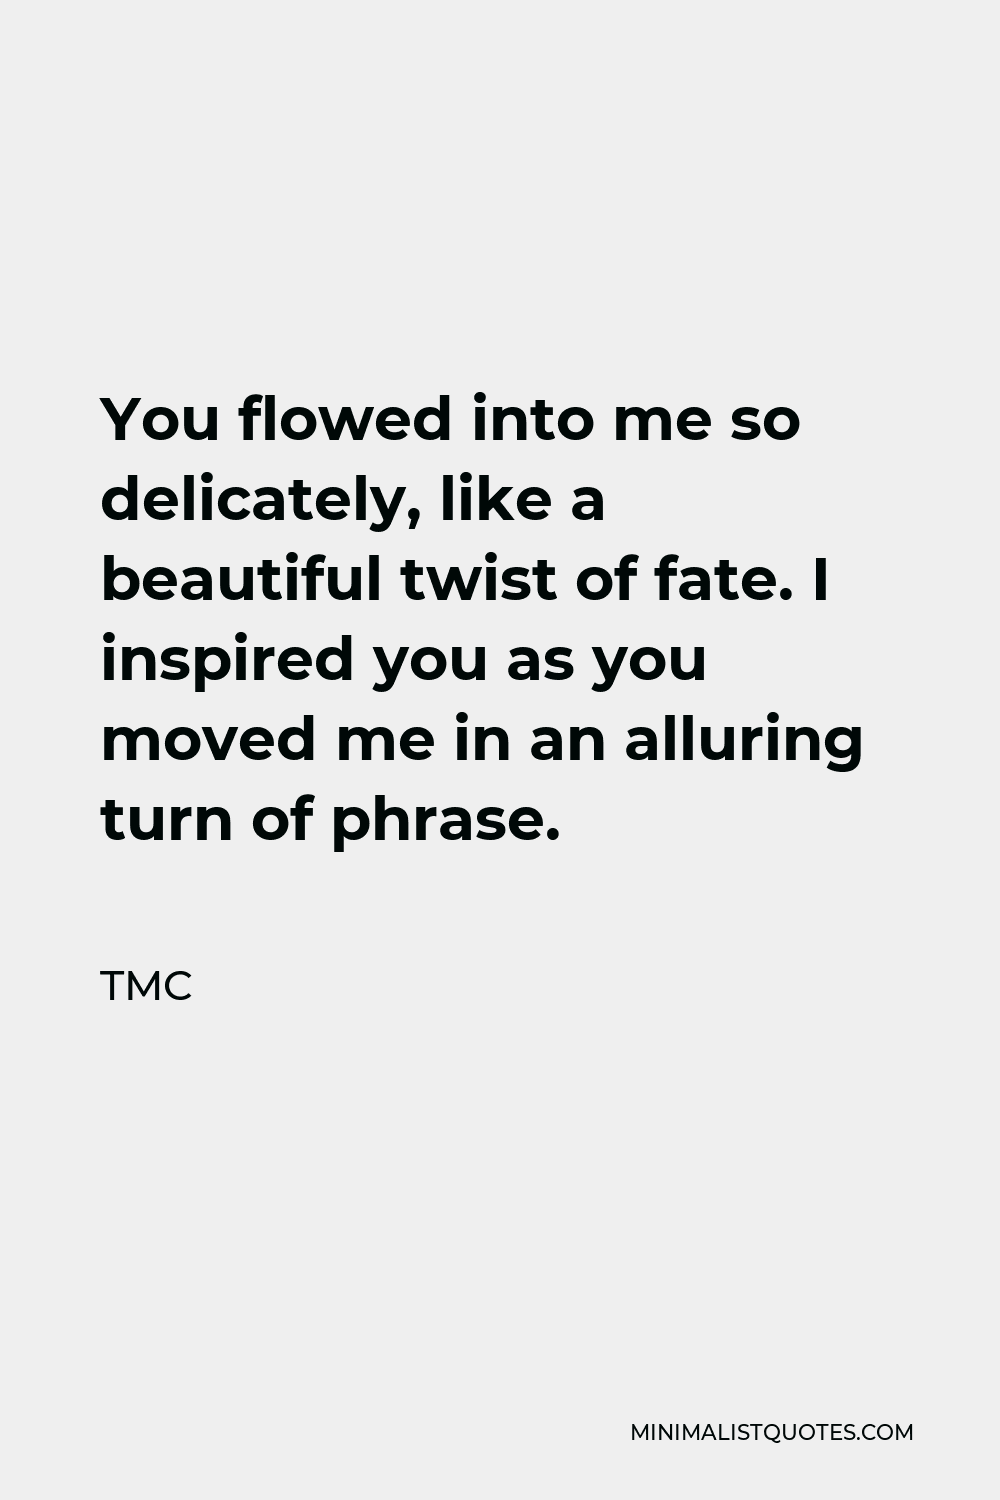 TMC Quote - You flowed into me so delicately, like a beautiful twist of fate. I inspired you as you moved me in an alluring turn of phrase.